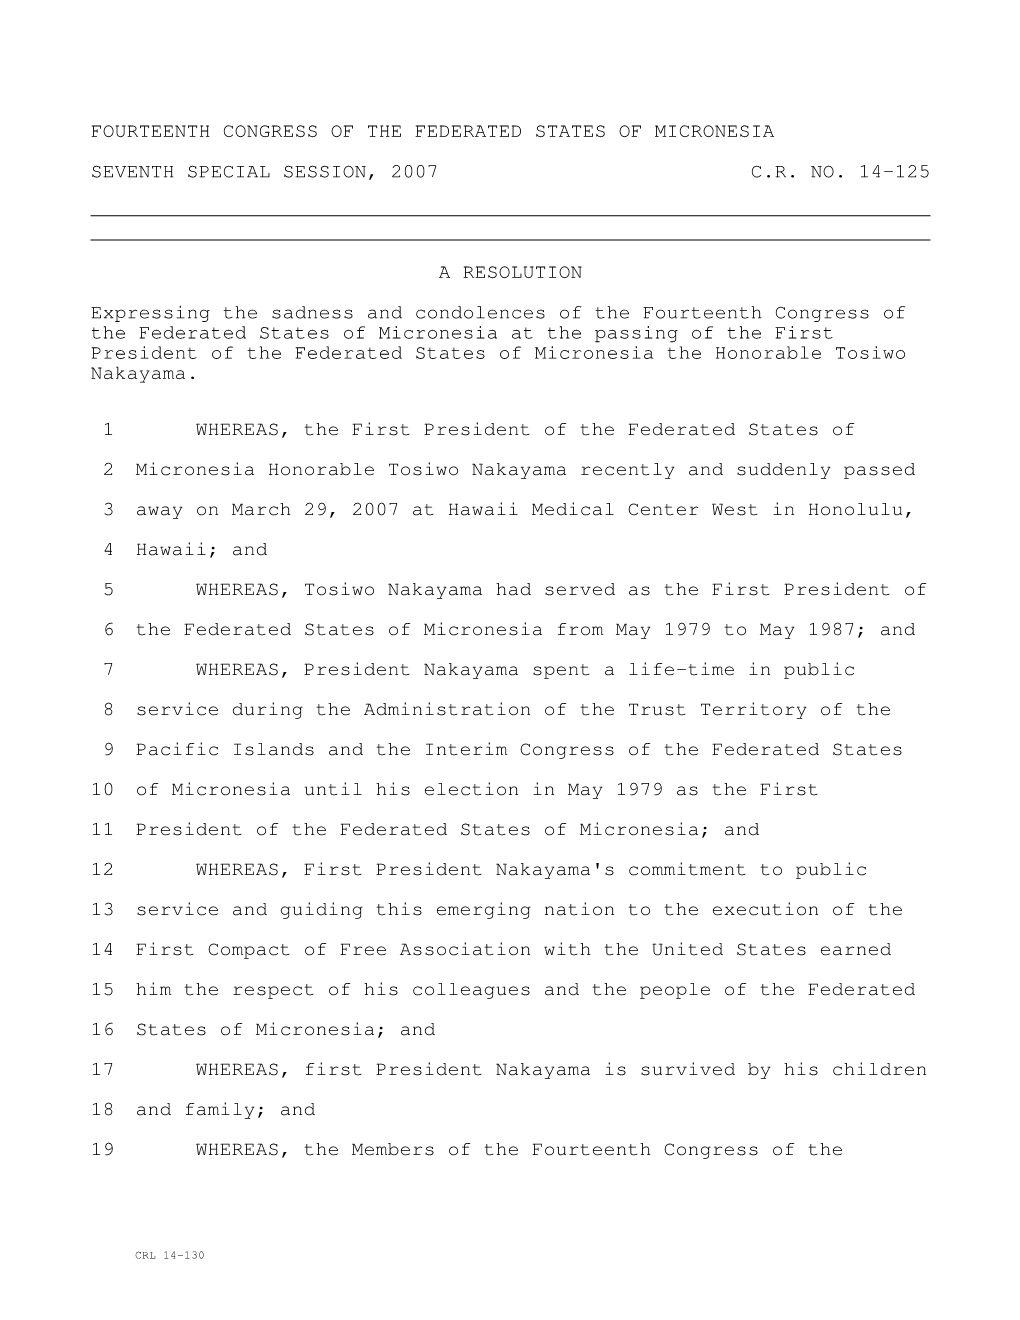 FOURTEENTH CONGRESS of the FEDERATED STATES of MICRONESIA SEVENTH SPECIAL SESSION, 2007 C.R. NO. 14-125 a RESOLUTION Expressing